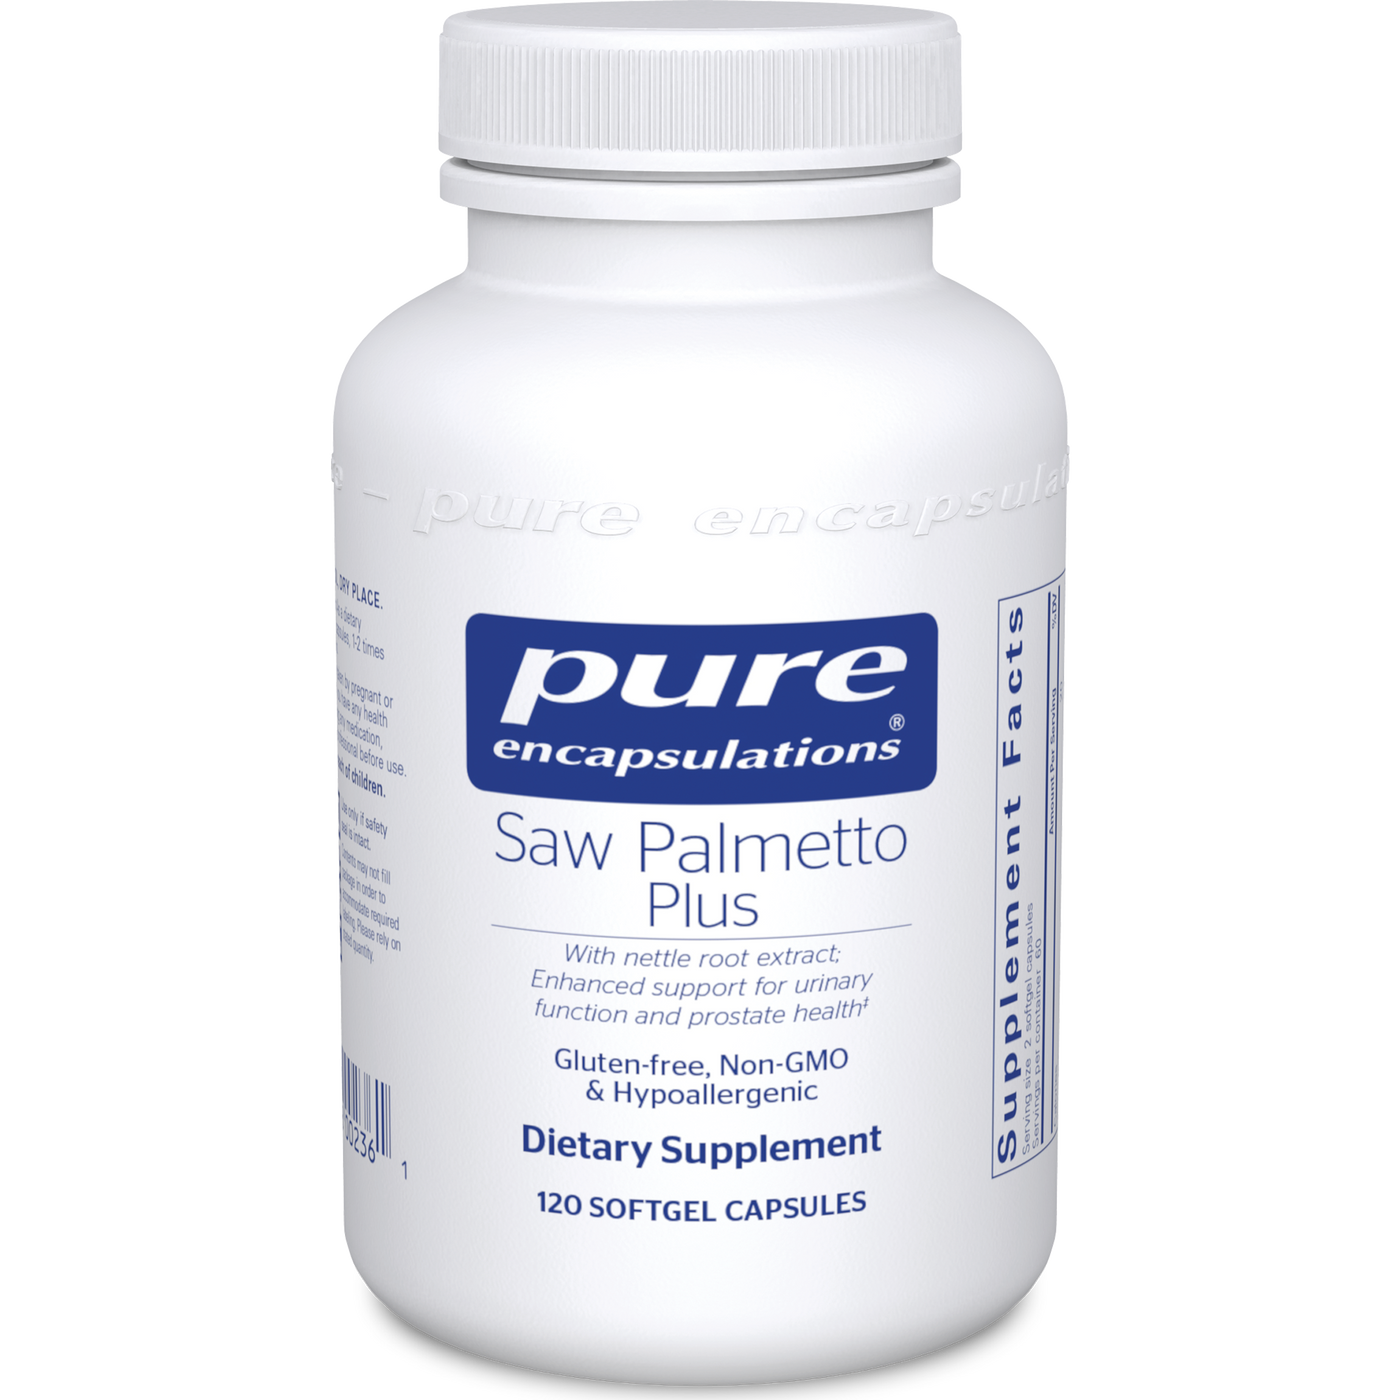 Saw Palmetto Plus 120 gels Curated Wellness